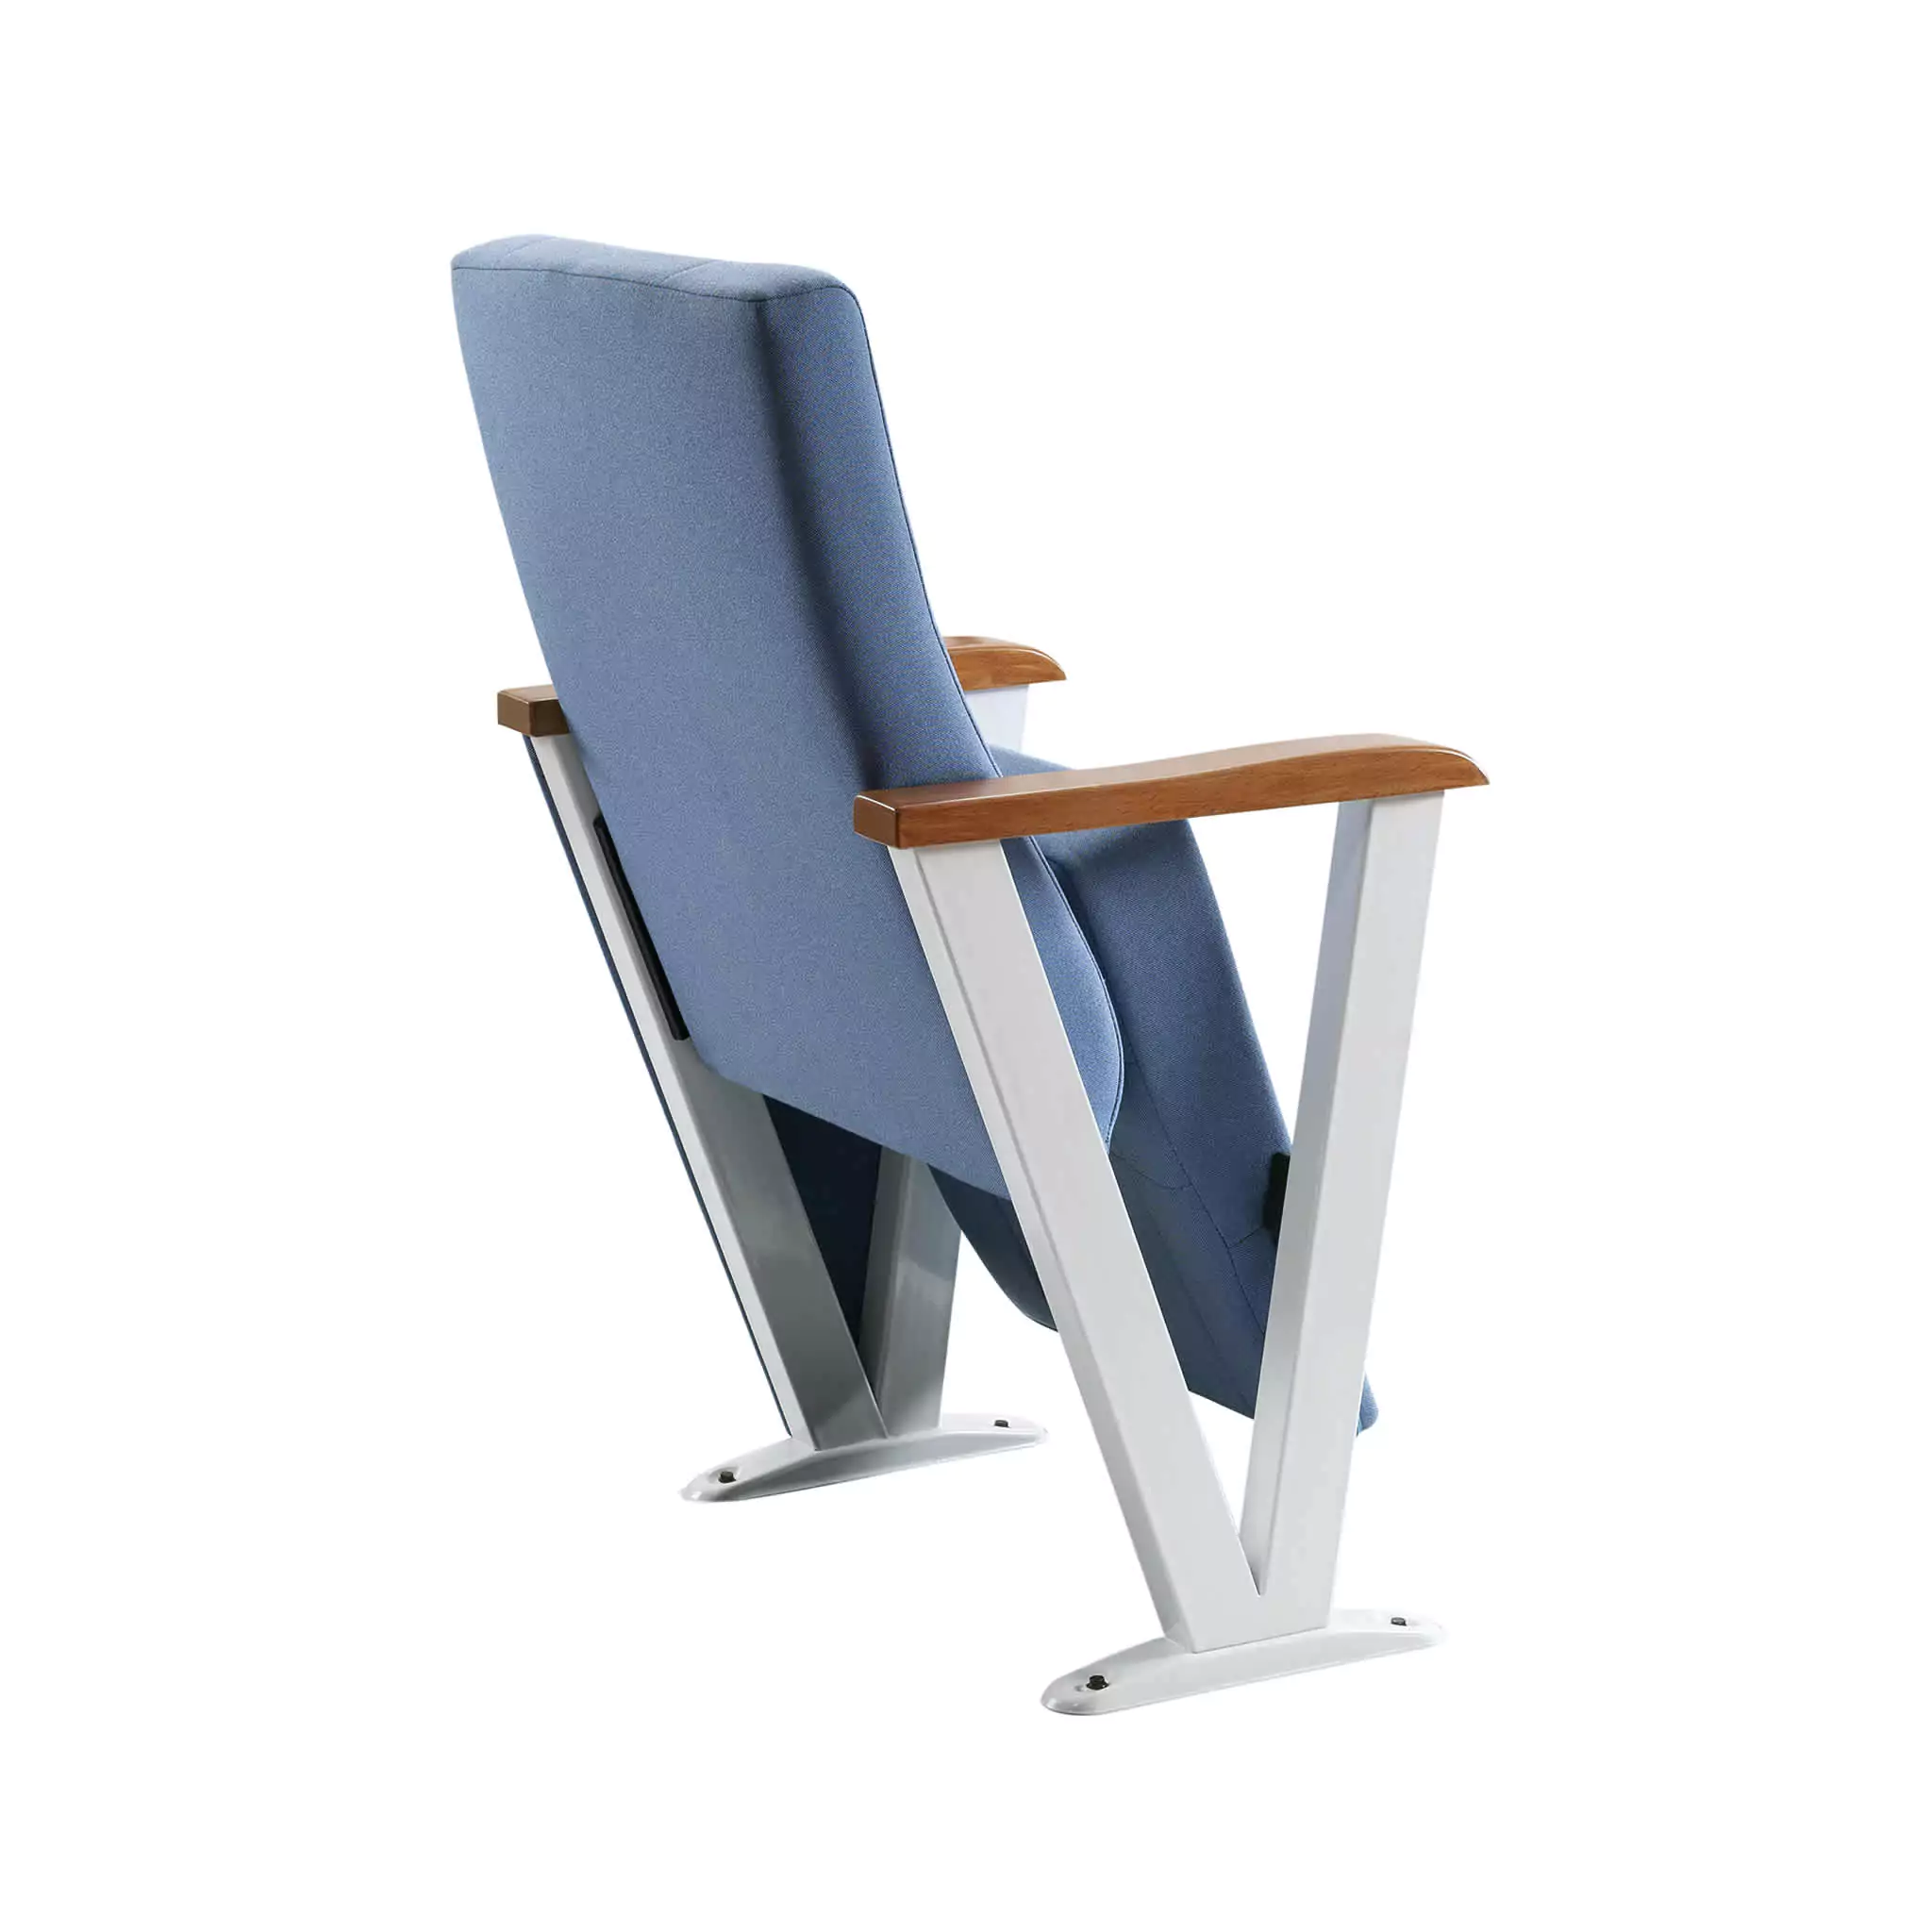 Simko Seating Products